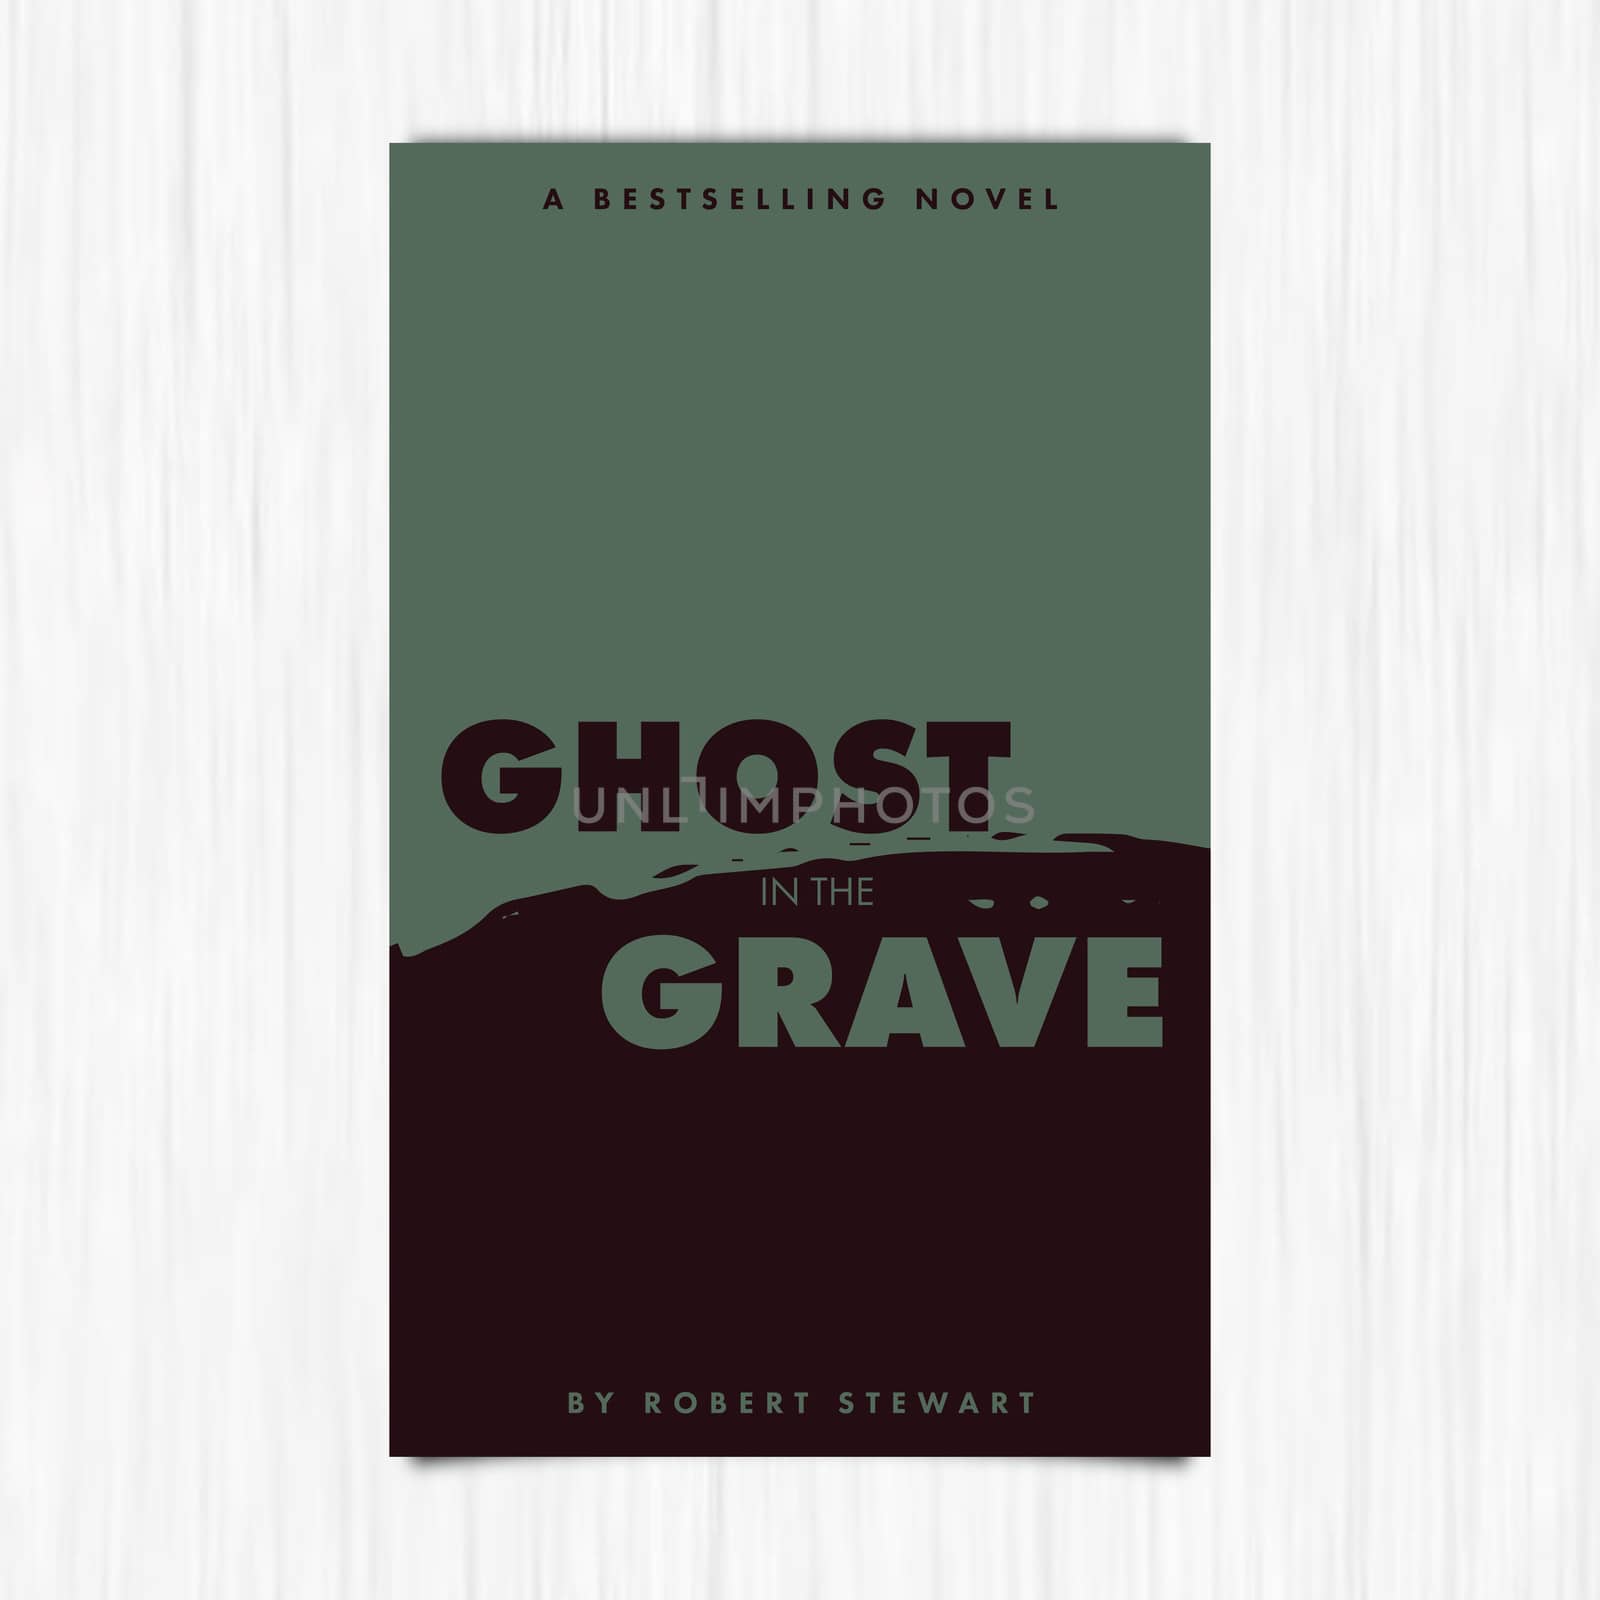 Vector of novel cover with ghost in the grave text by Wavebreakmedia